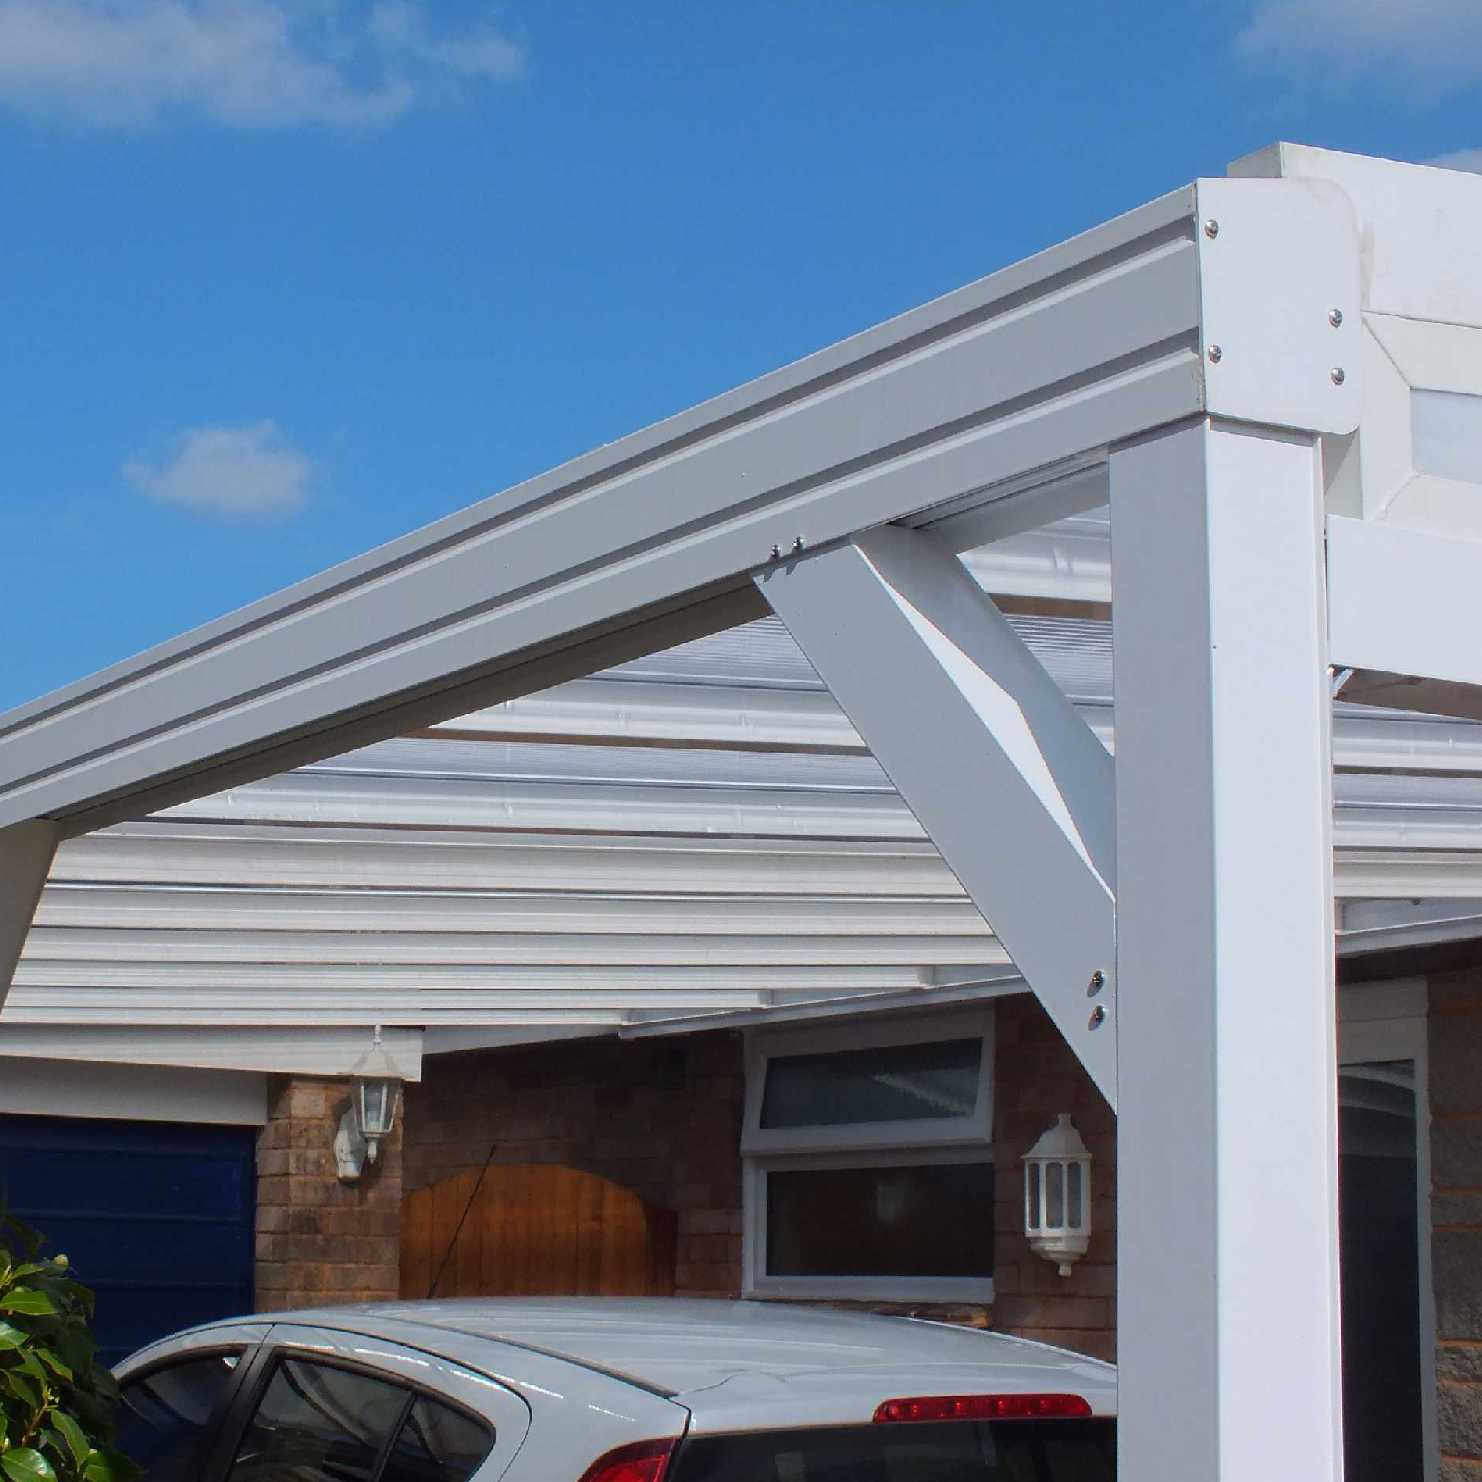 Buy Omega Smart Lean-To Canopy, White with 16mm Polycarbonate Glazing - 6.0m (W) x 2.5m (P), (3) Supporting Posts online today